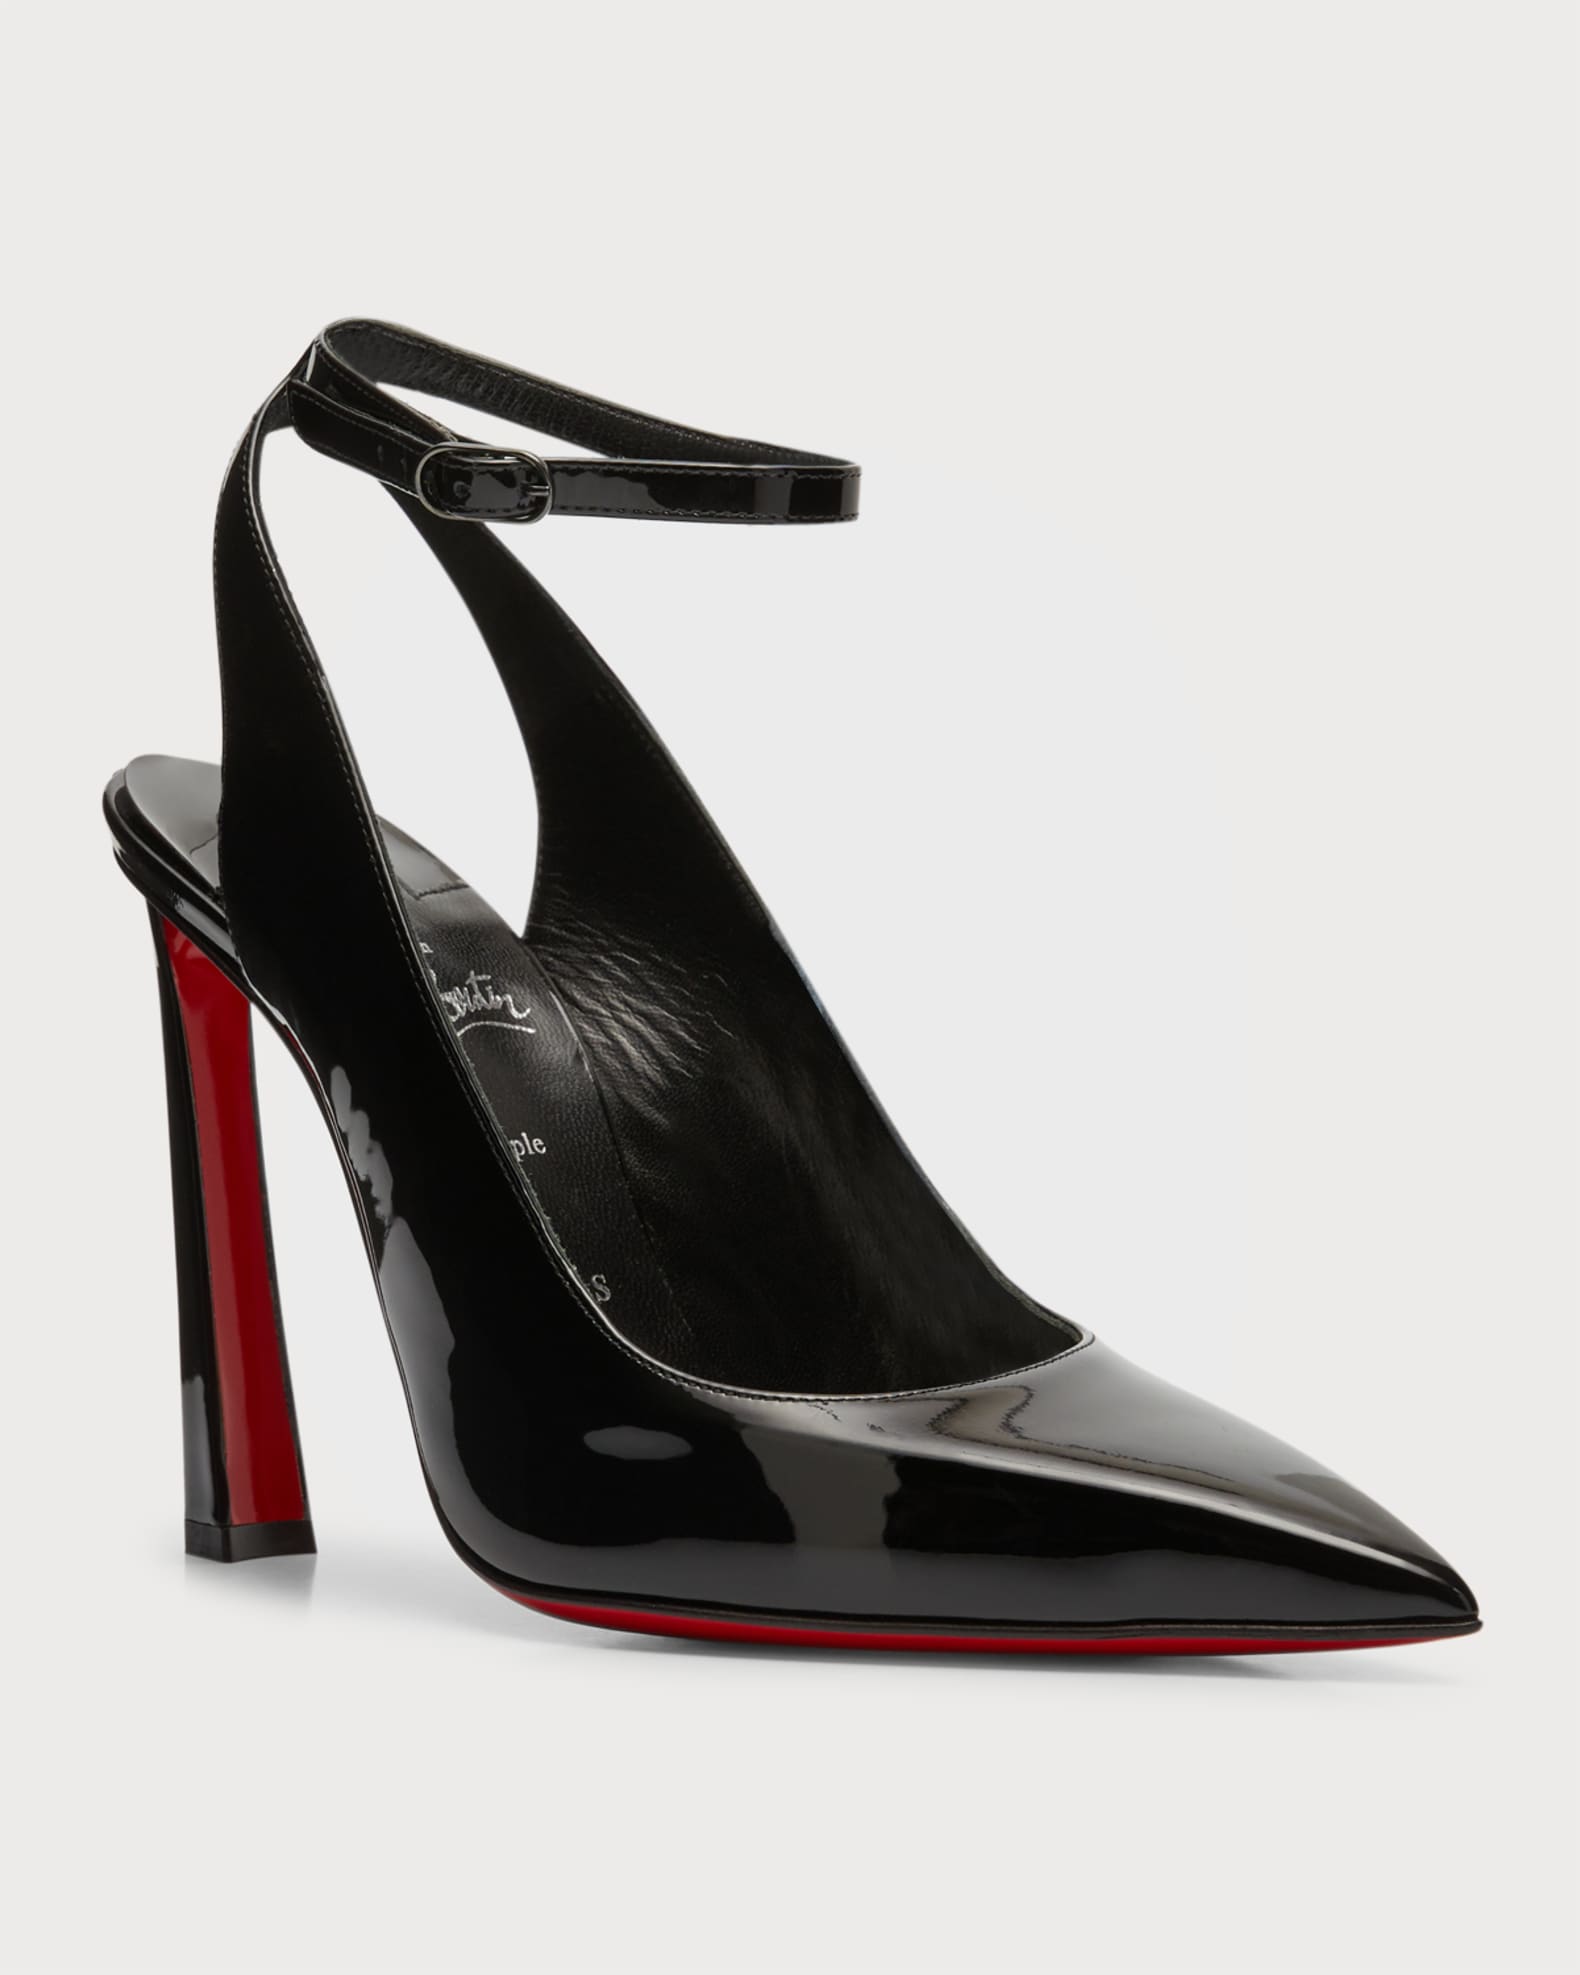 Christian Louboutin Condora Ankle-Strap Red Sole Pumps | Neiman Marcus